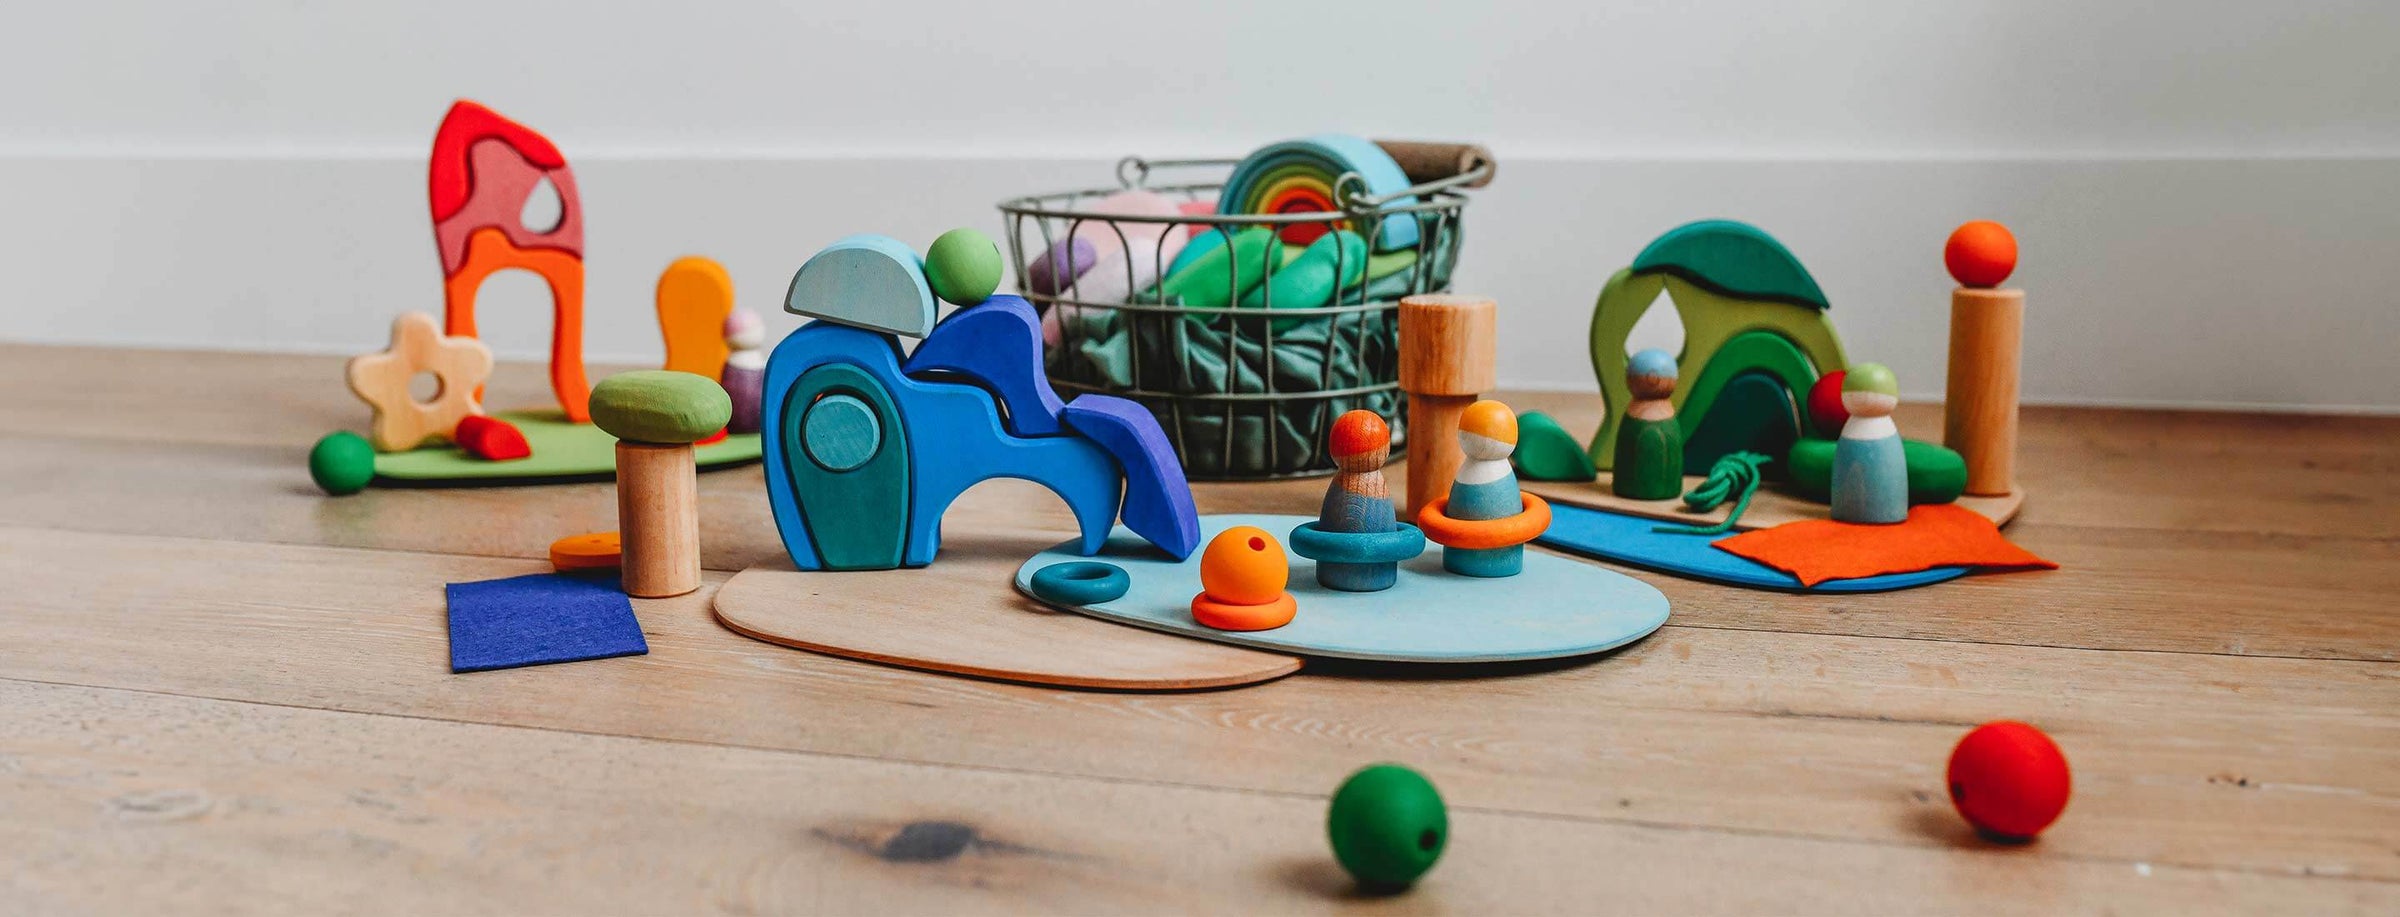 Red, blue, and green Grimm's wooden blocks set with green toy basket in the background